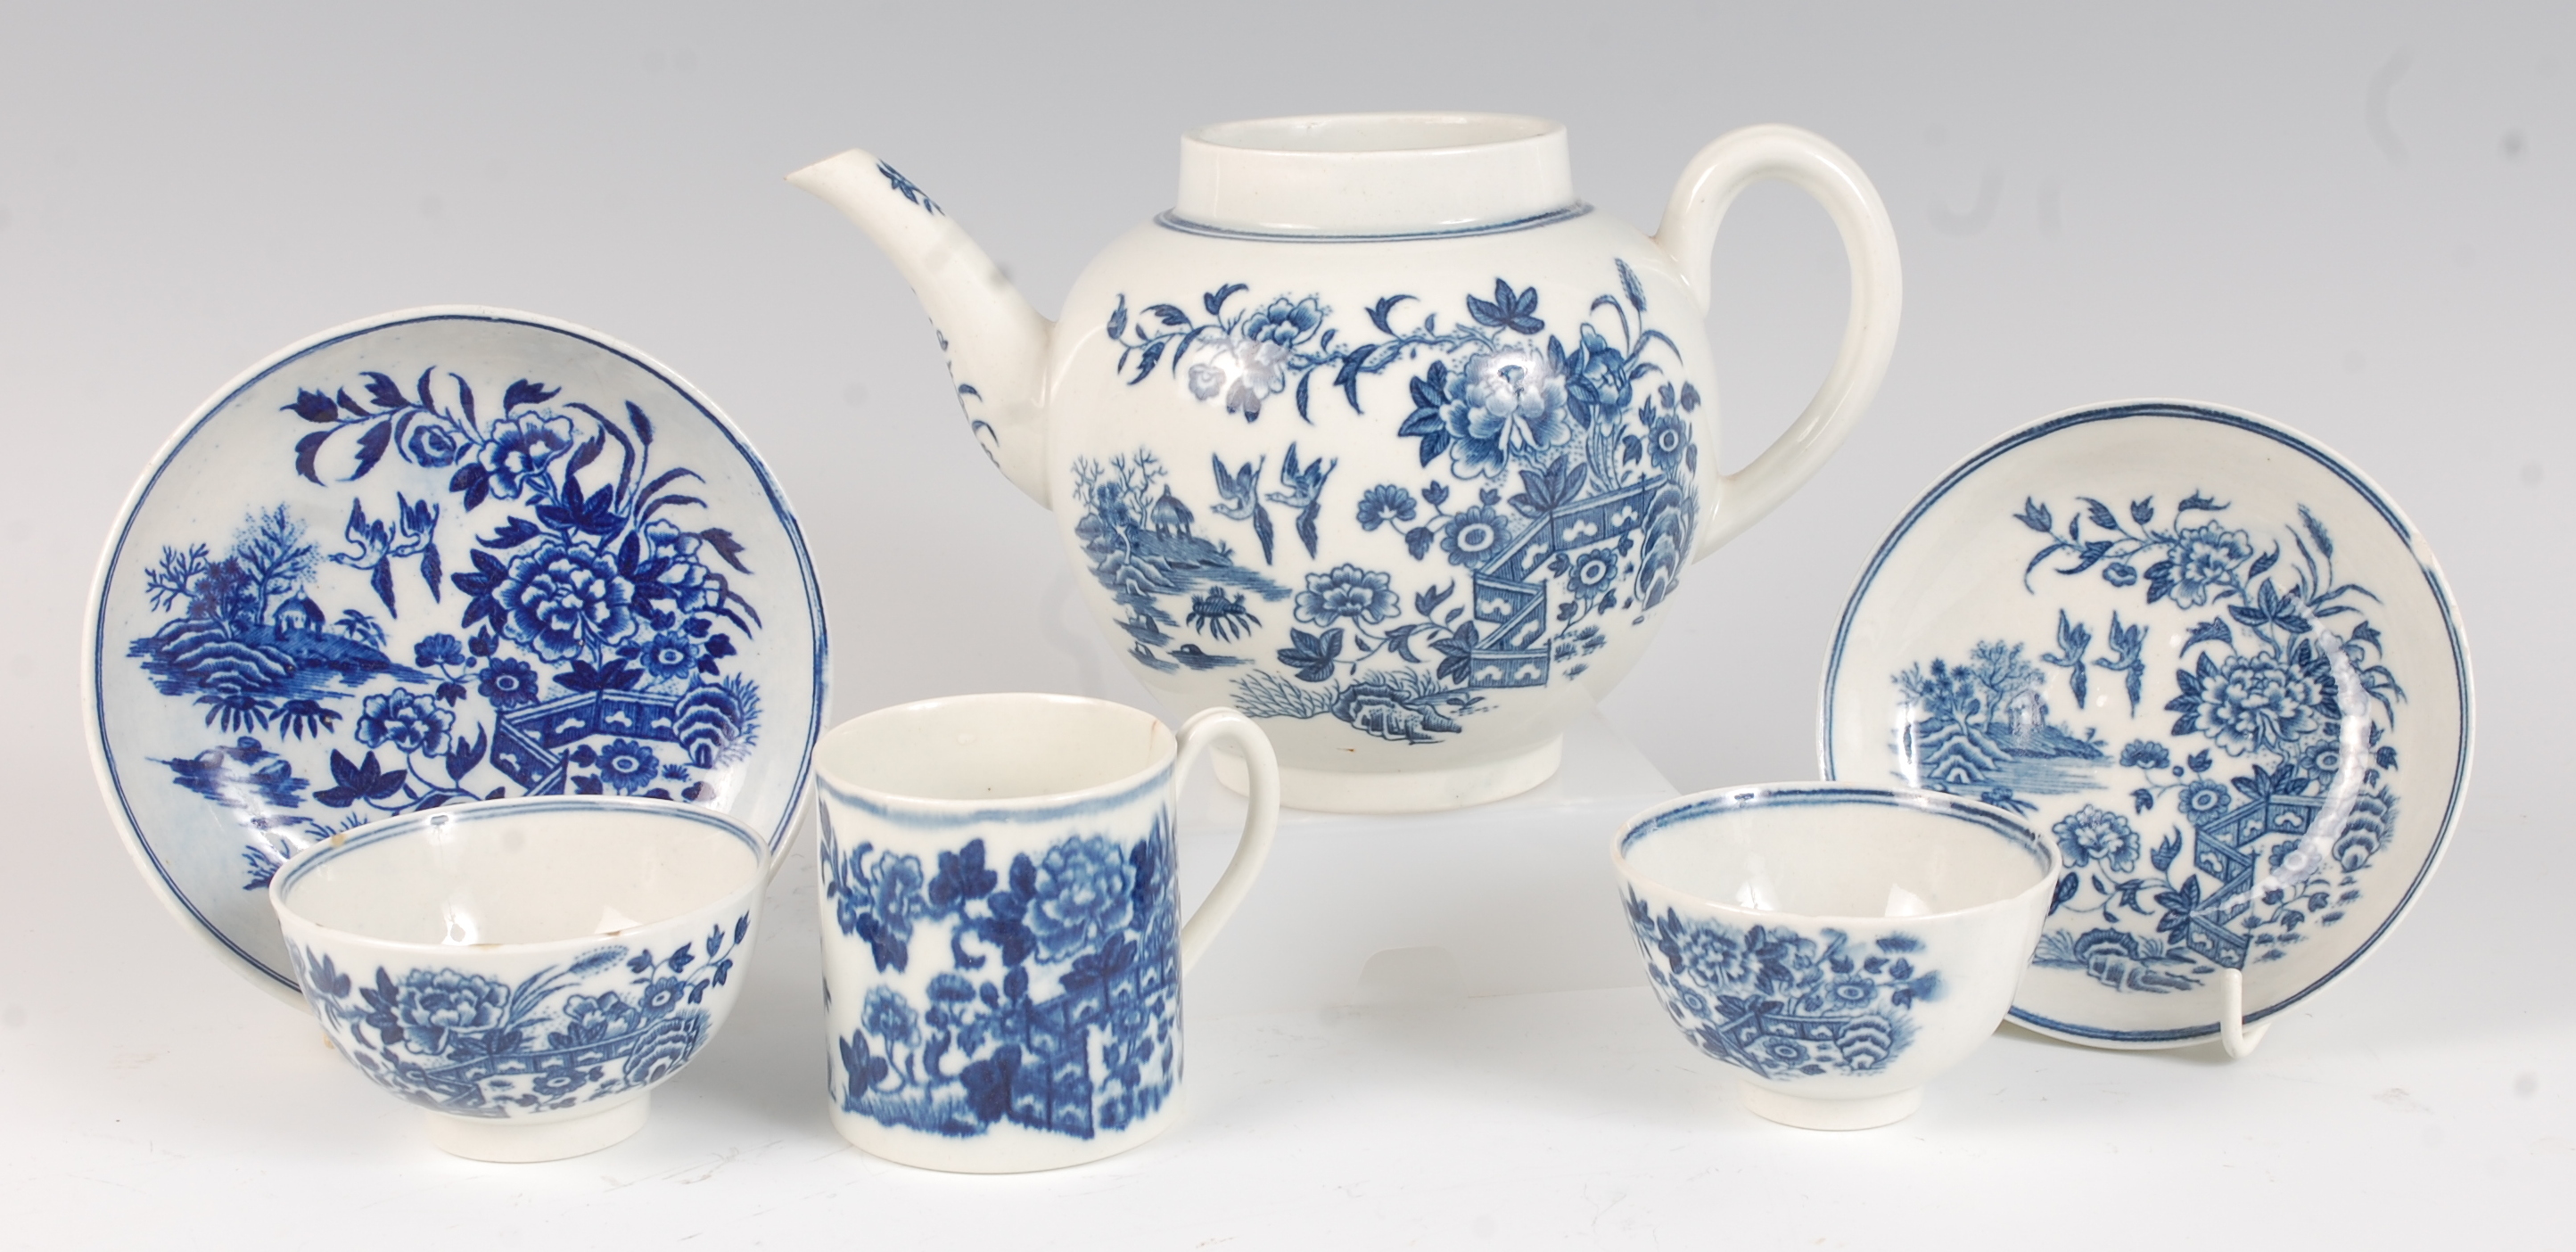 A Worcester porcelain bullet shaped teapot, underglaze blue decorated in the Fence pattern (